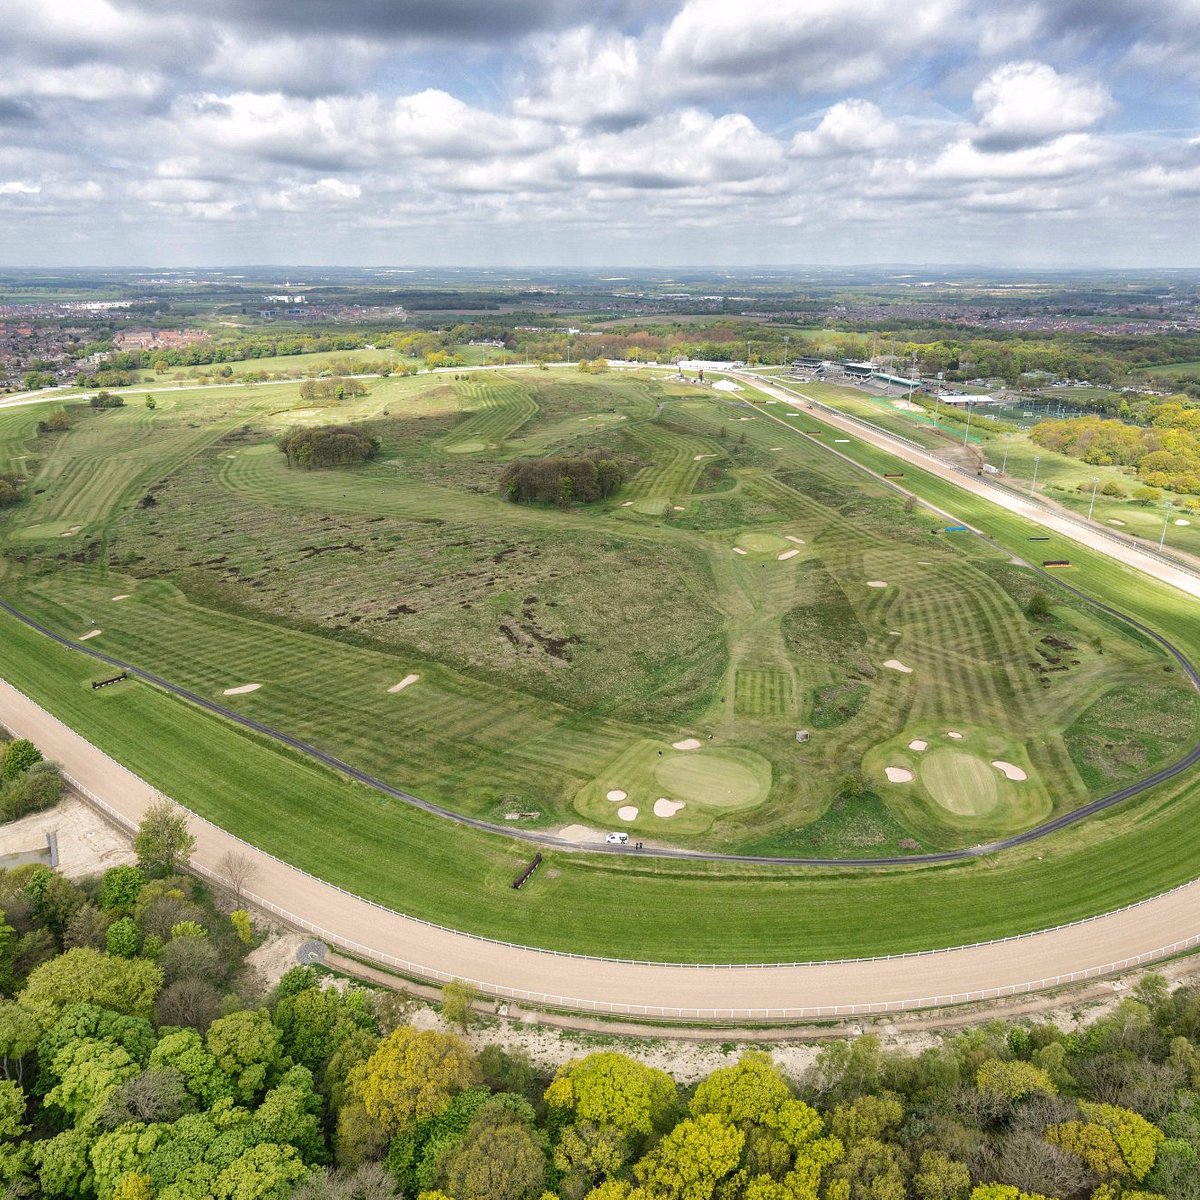 Newcastle Racecourse (Newcastle upon Tyne): All You Need to Know